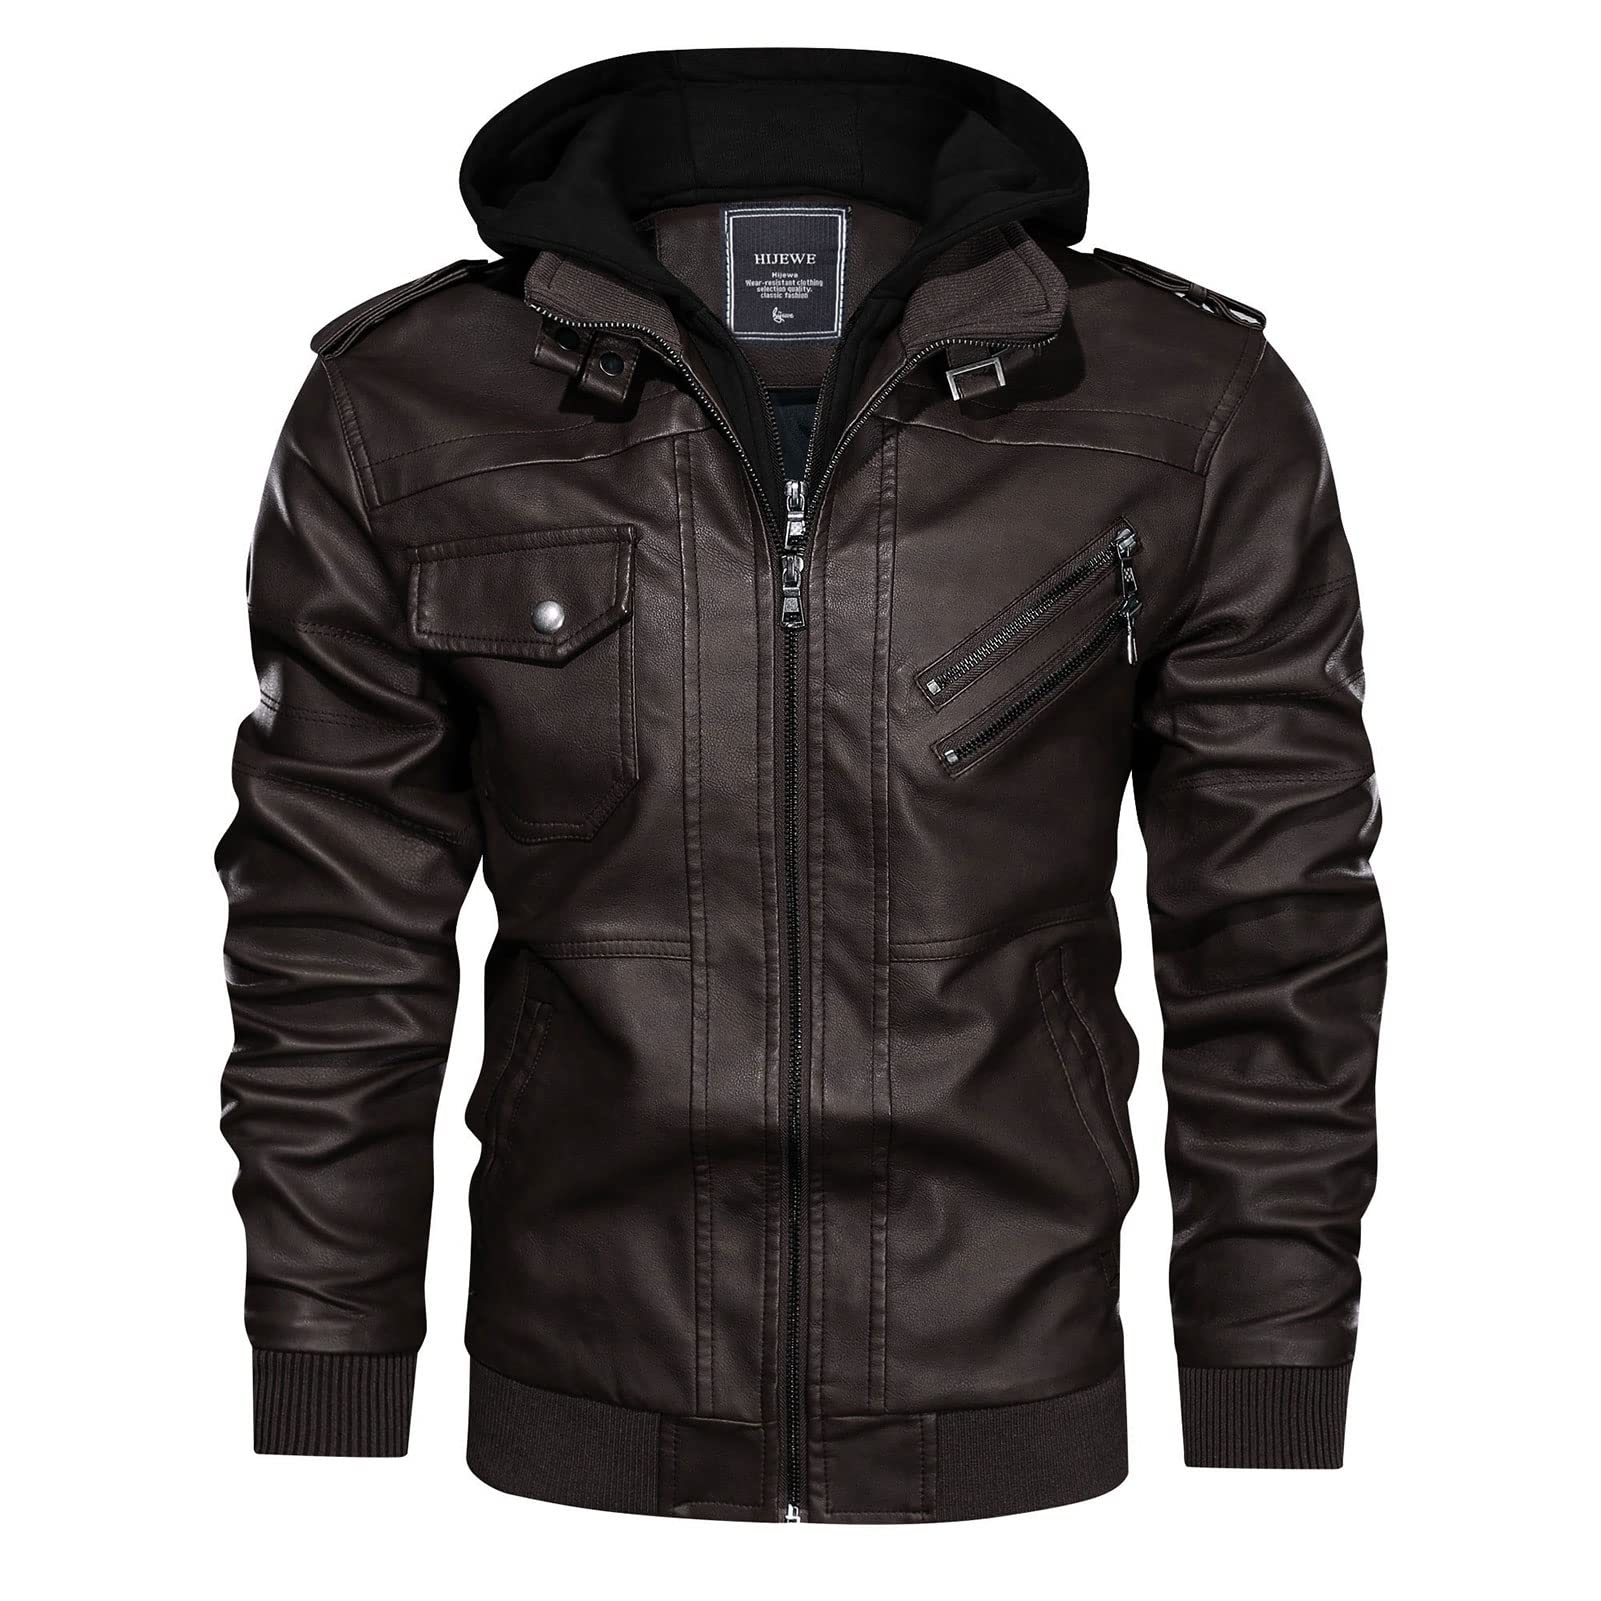 Winter City Sport Bike Jacket for Sale - China Vented Motorcycle Jacket and Motorcycle  Jackets for Men price | Made-in-China.com